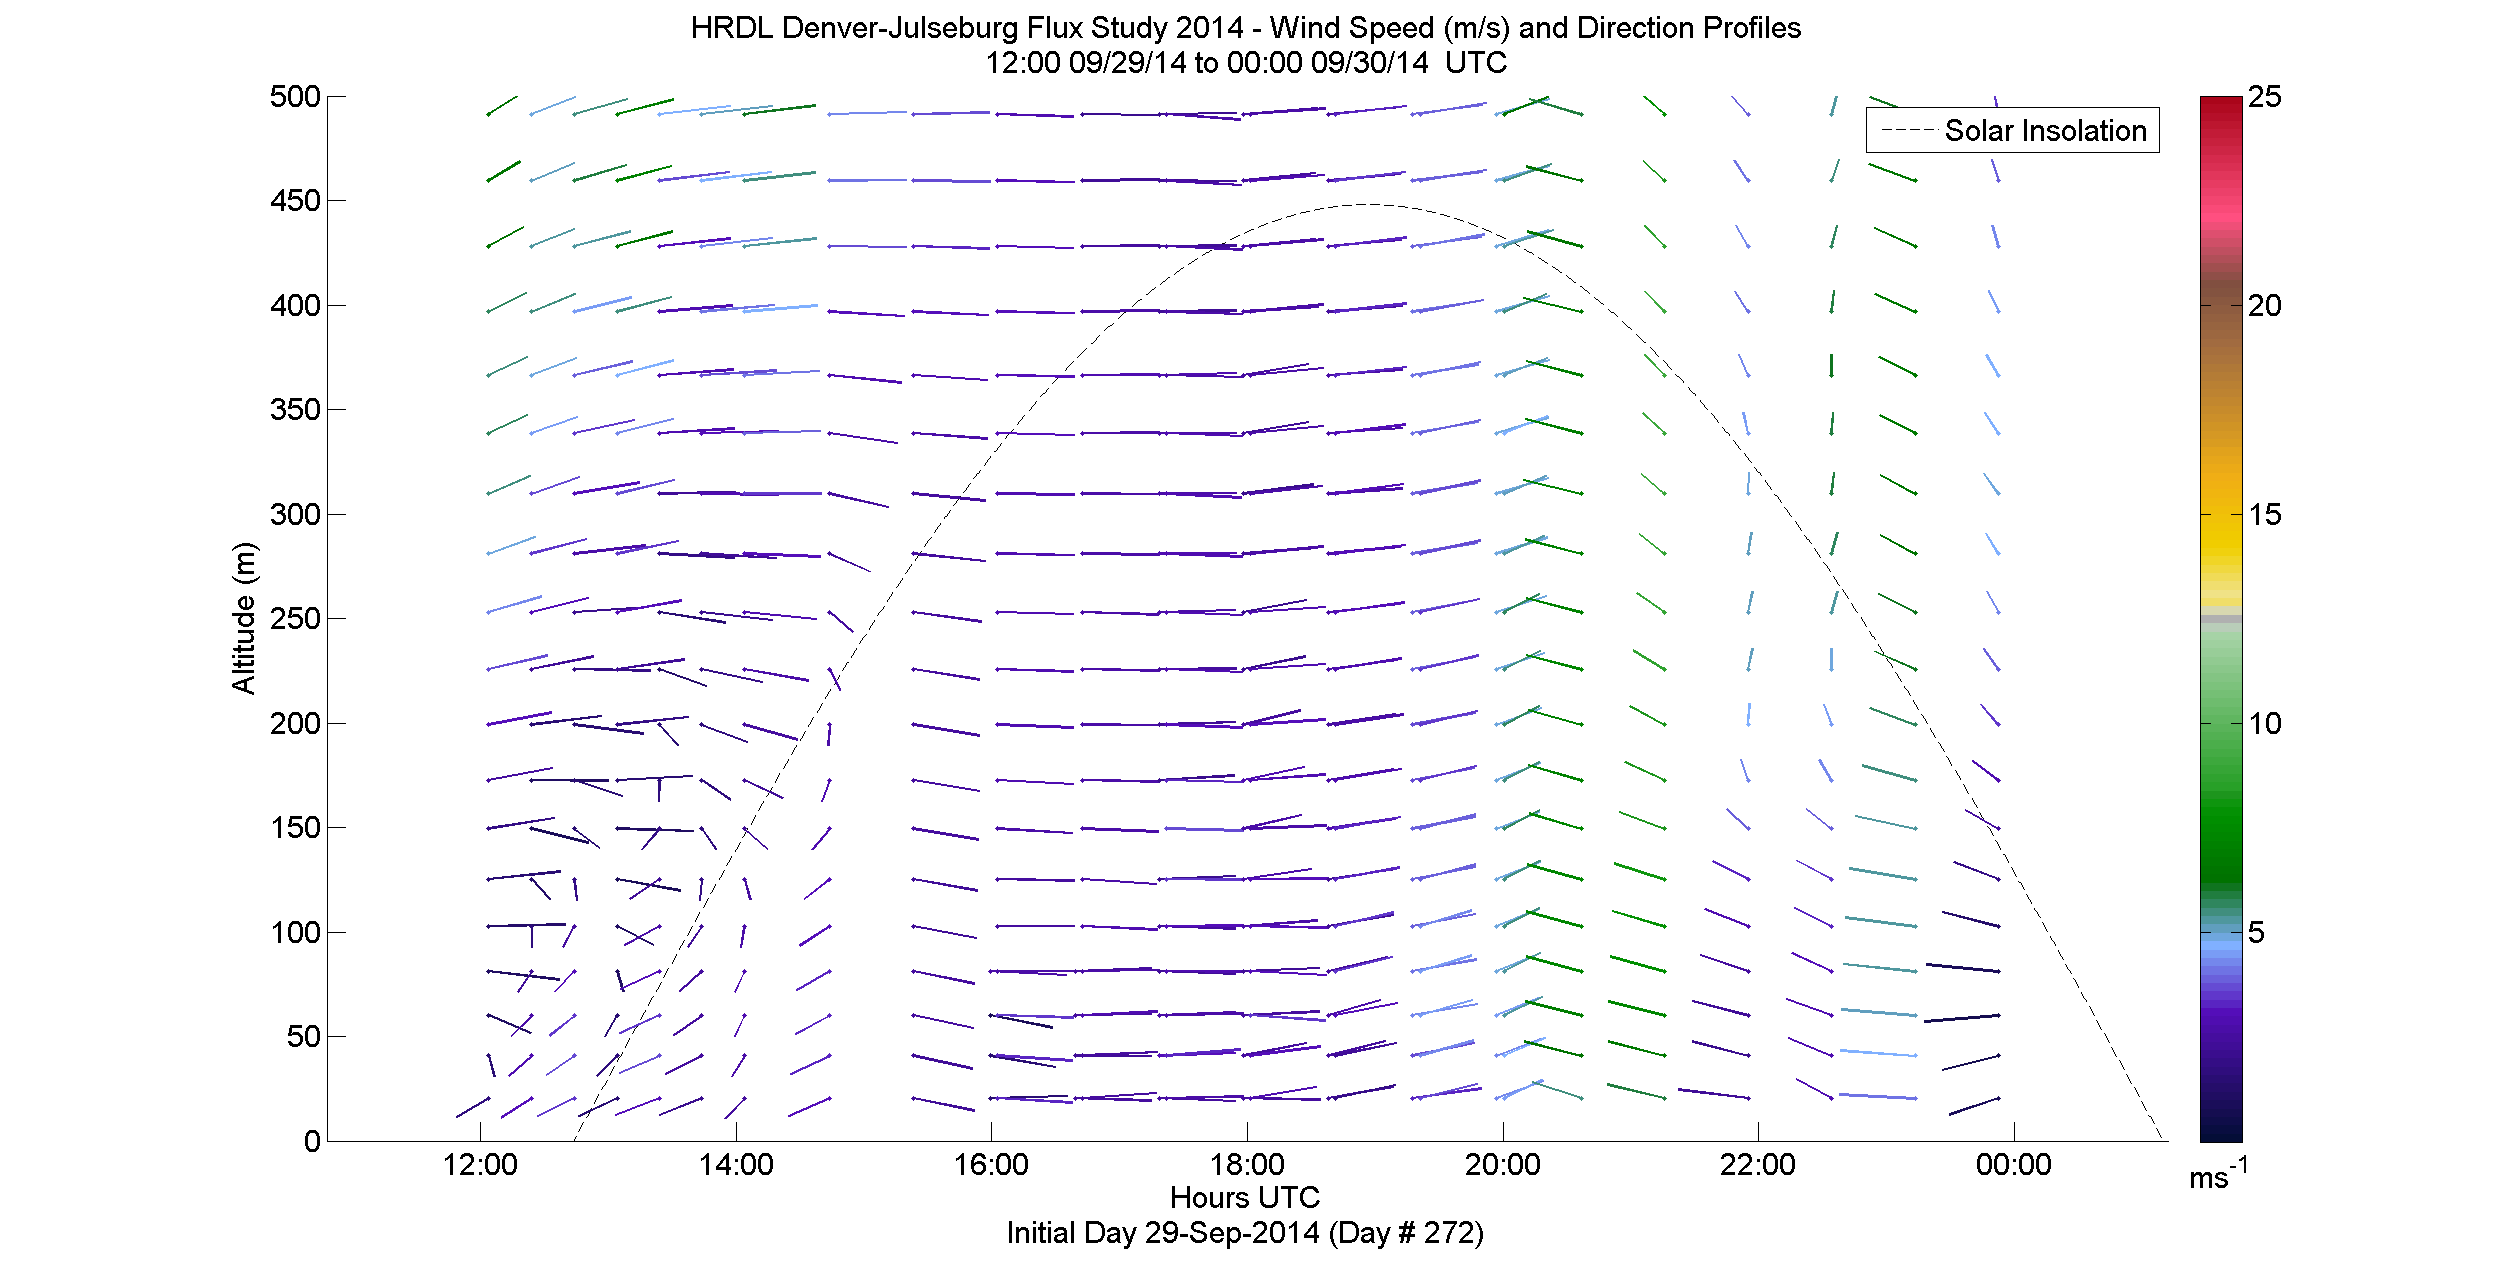 HRDL speed and direction profile - September 29 pm